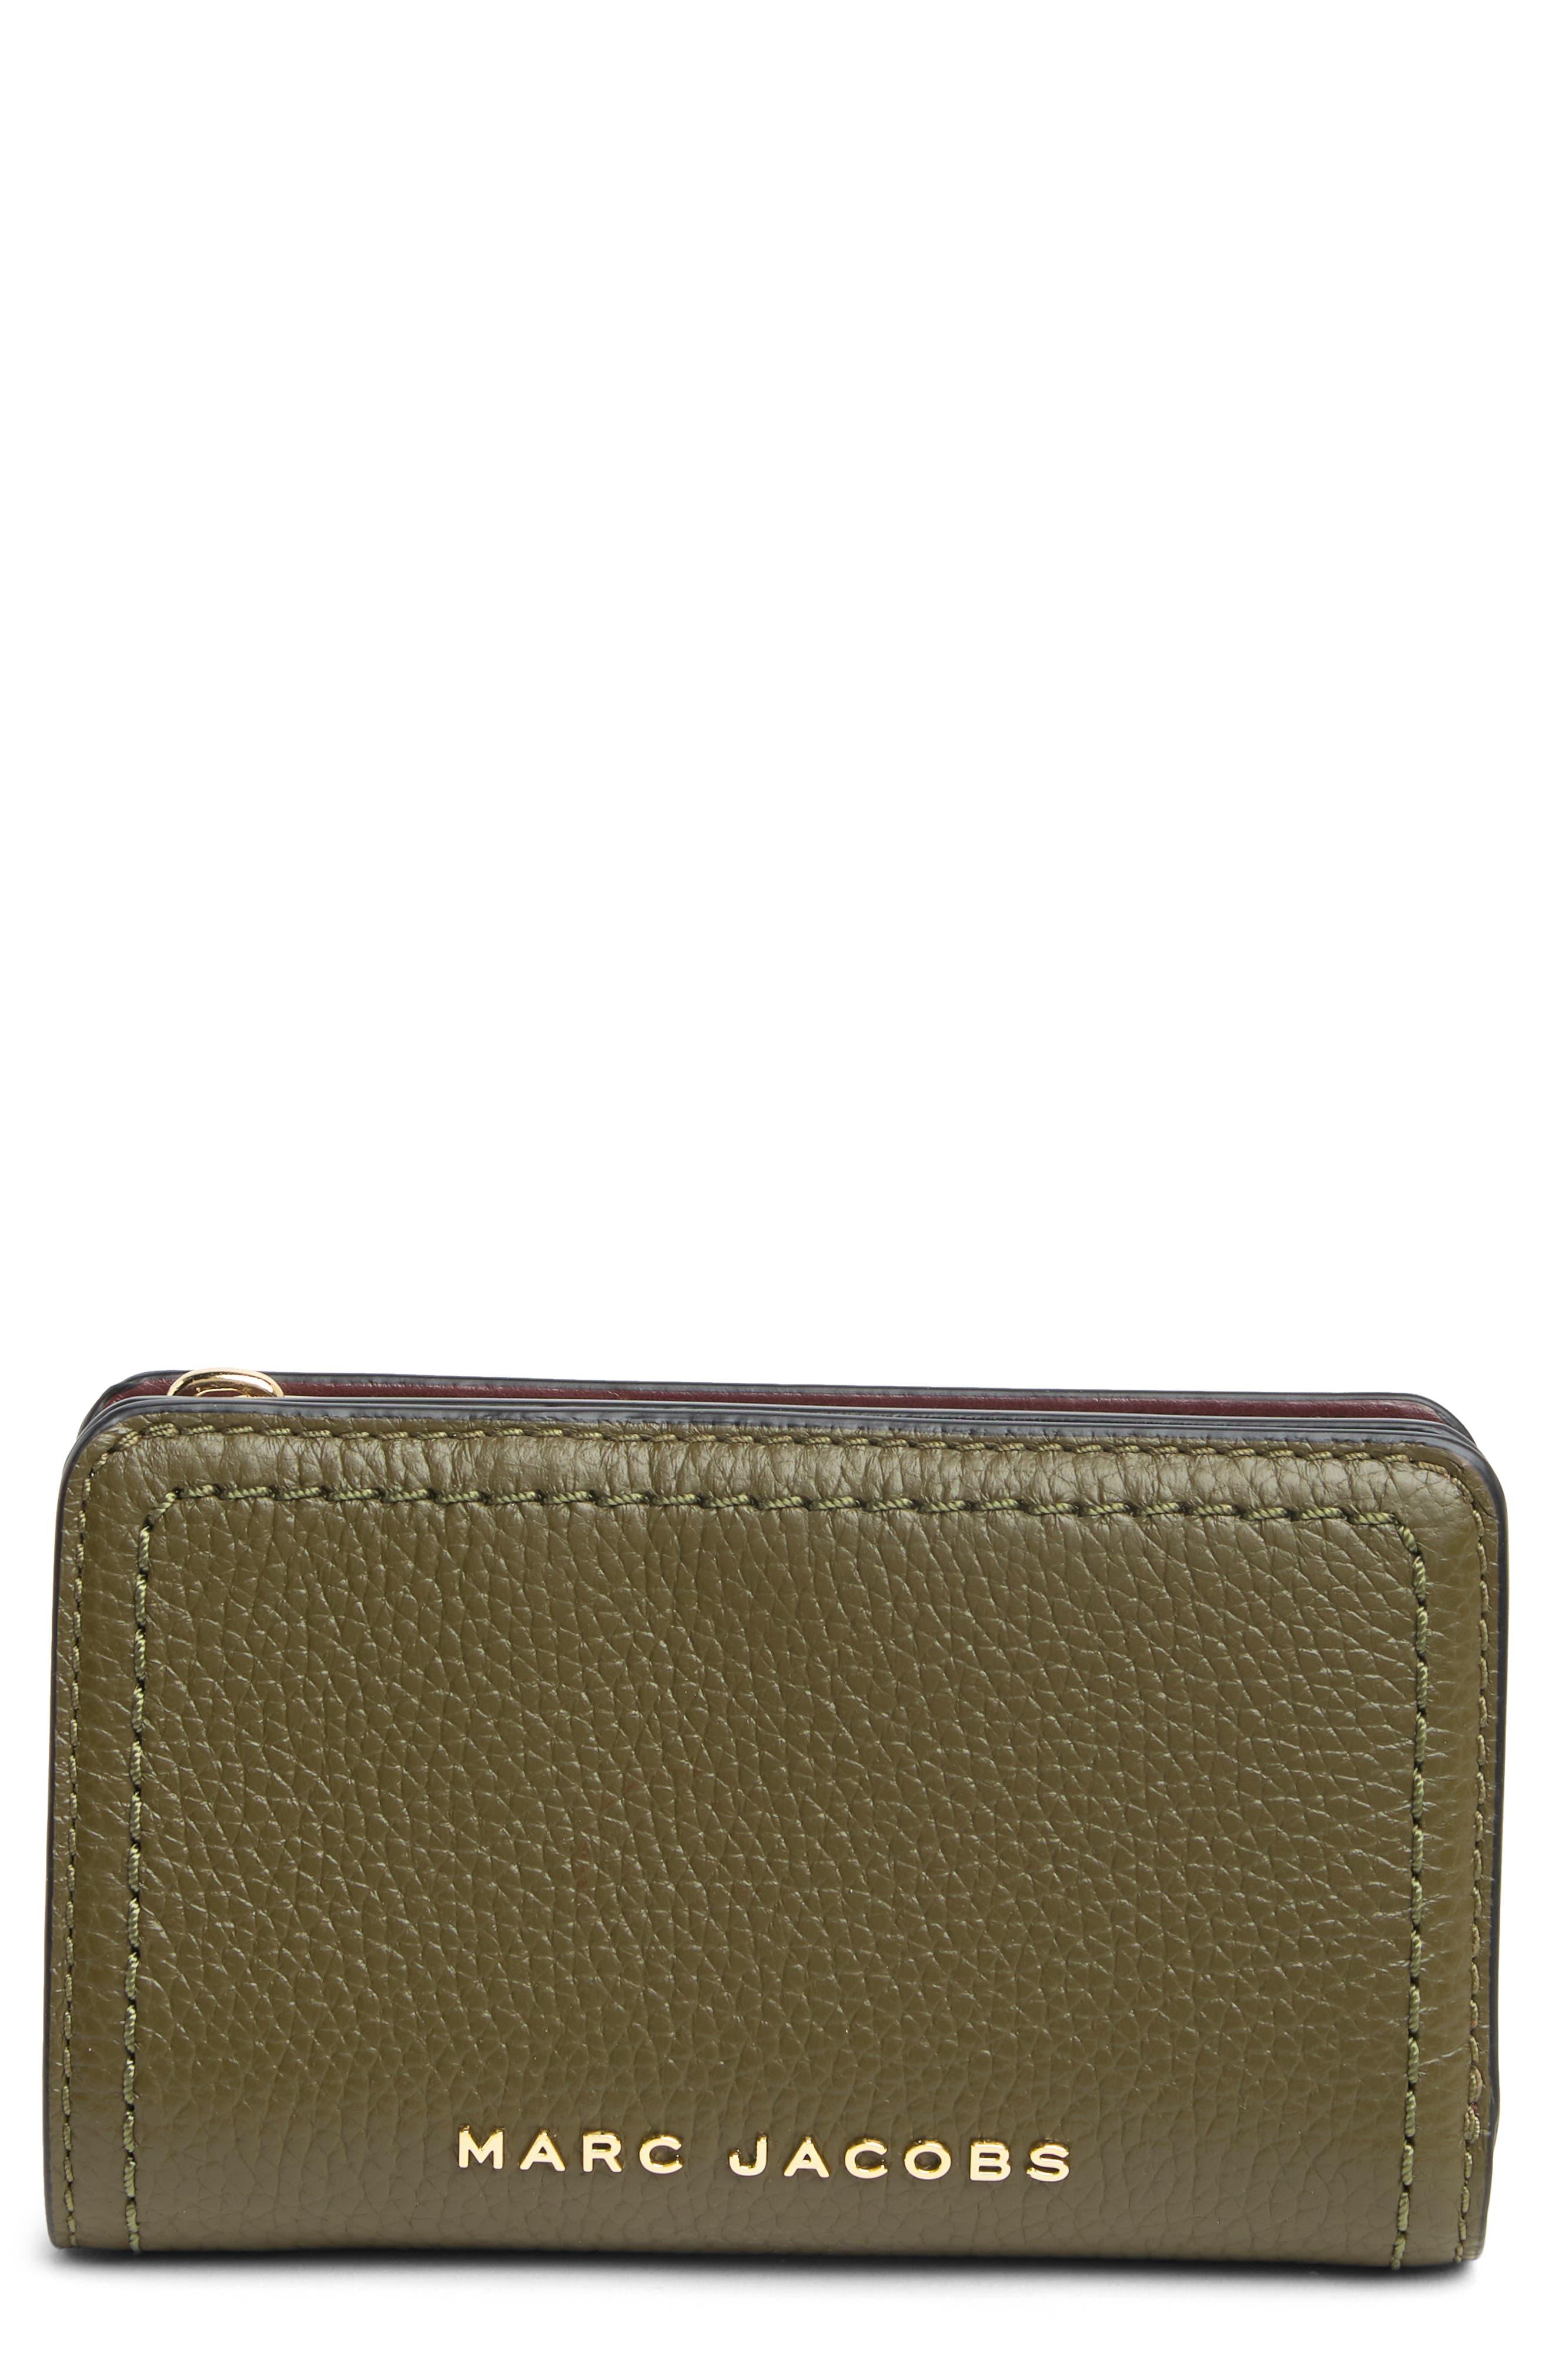 Marc Jacobs Topstitched Compact Zip Wallet in Green | Lyst